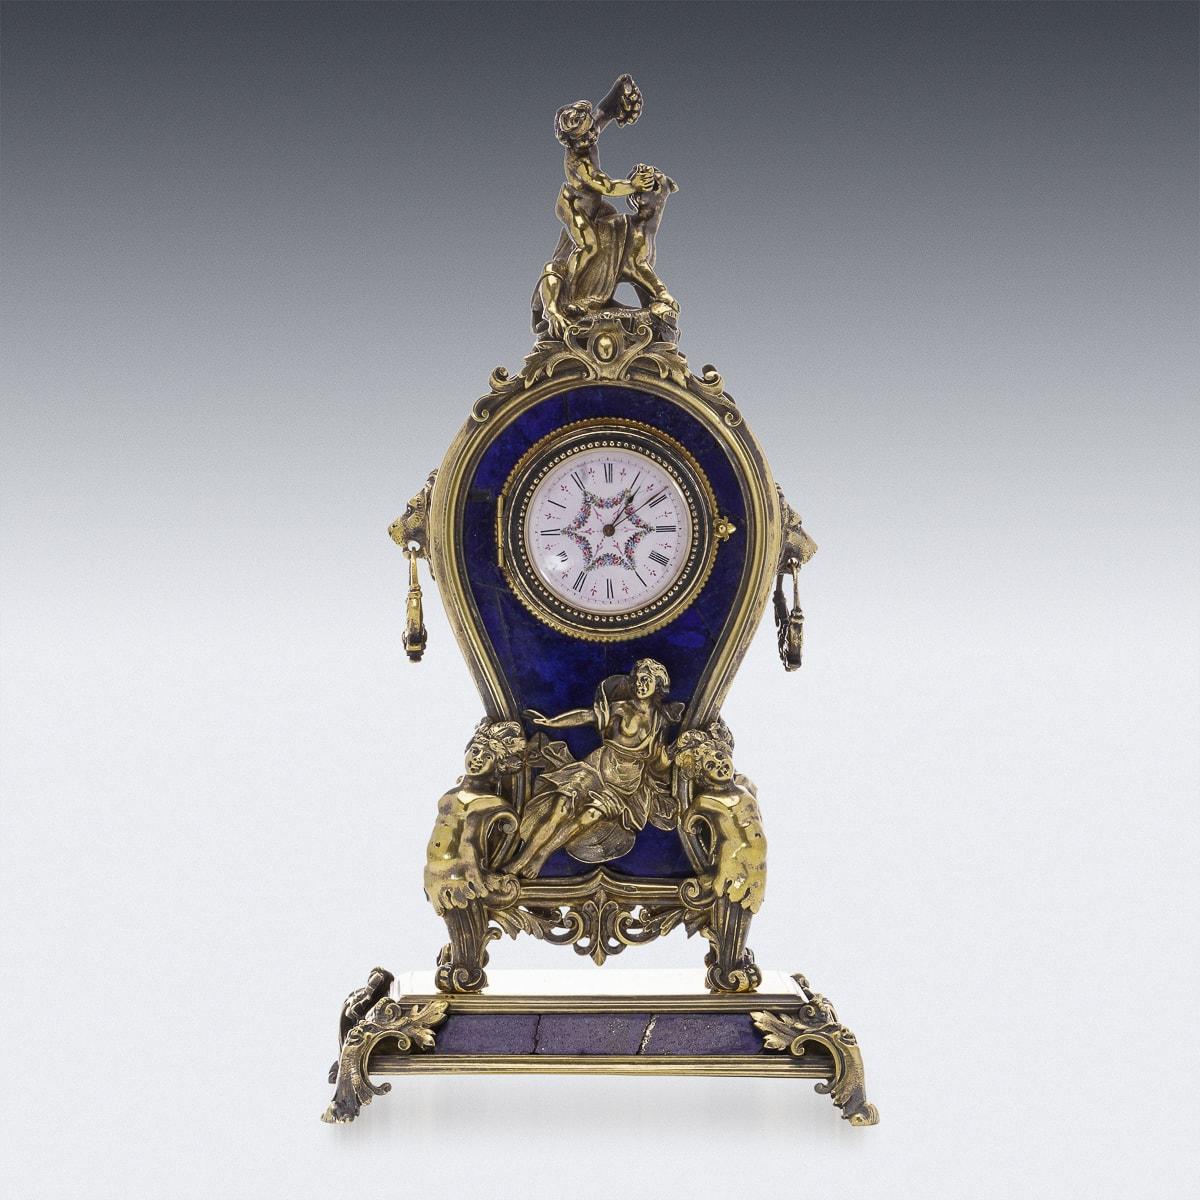 Antique late-19th Century Austrian exceptional solid silver gilt & lapis lazuli miniature clock, At the top, a cherub feeds grapes to a panther, while a pair of lion masks adorn the sides. In the clock's center, four nymphs hold the lapis body, with